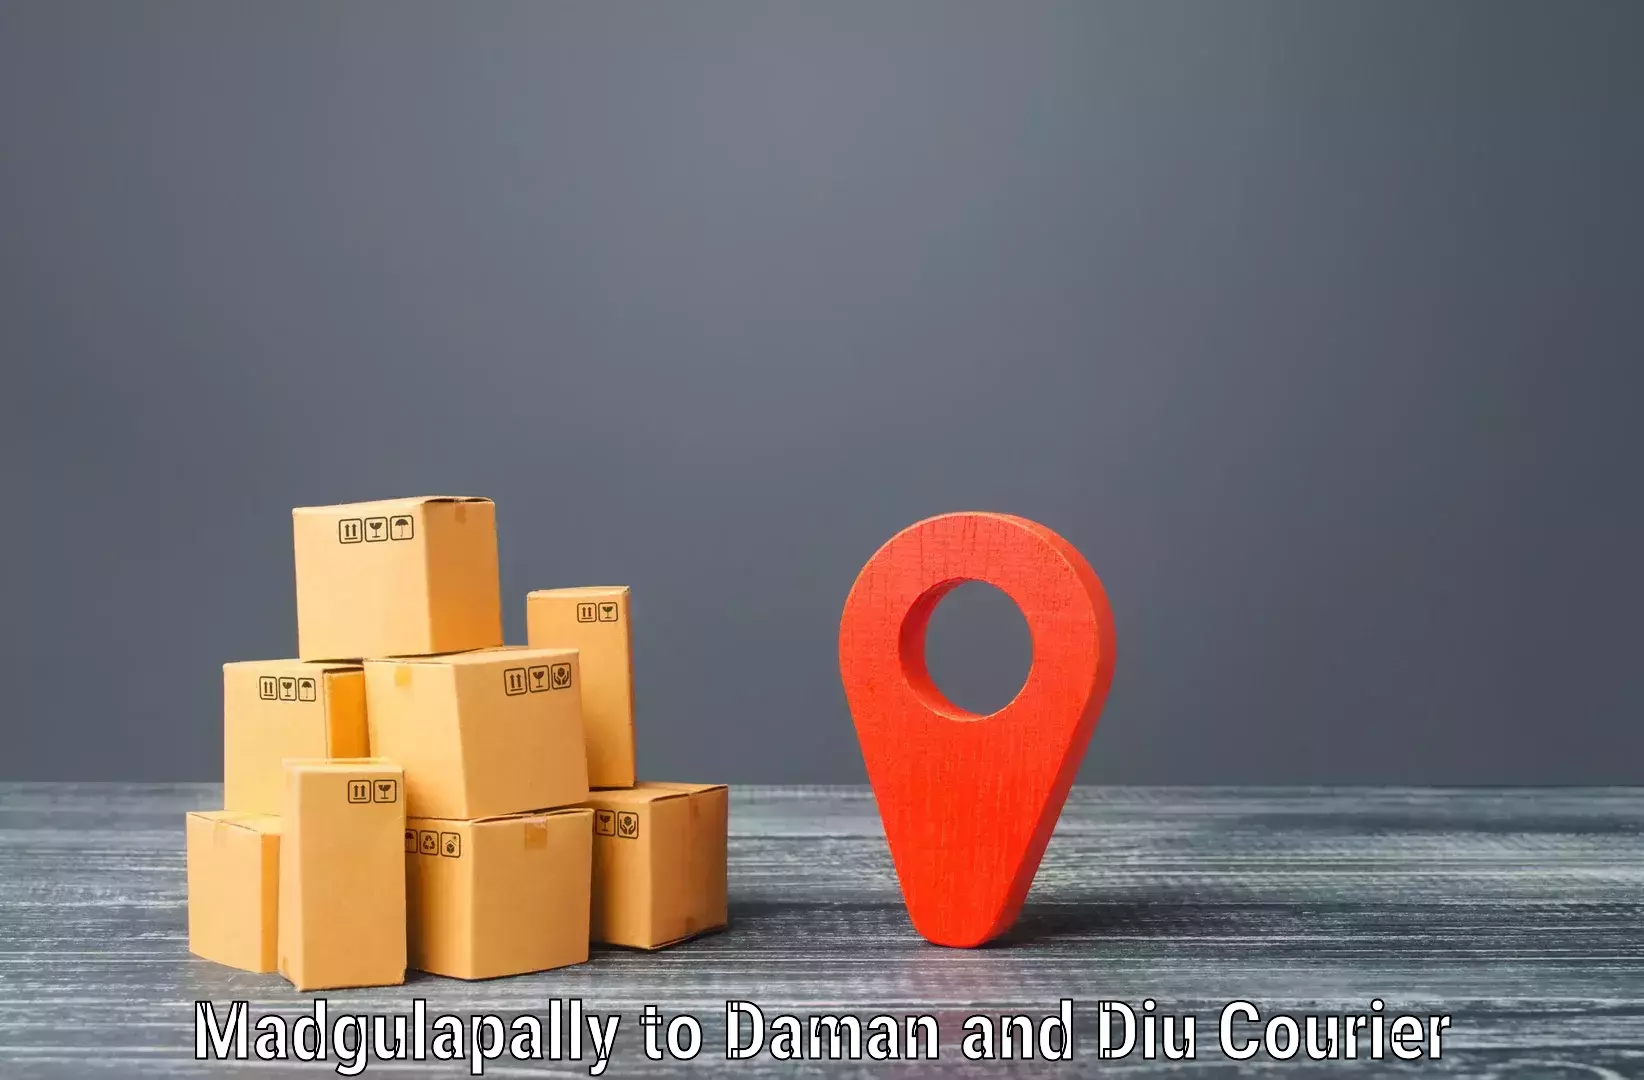 State-of-the-art courier technology Madgulapally to Diu